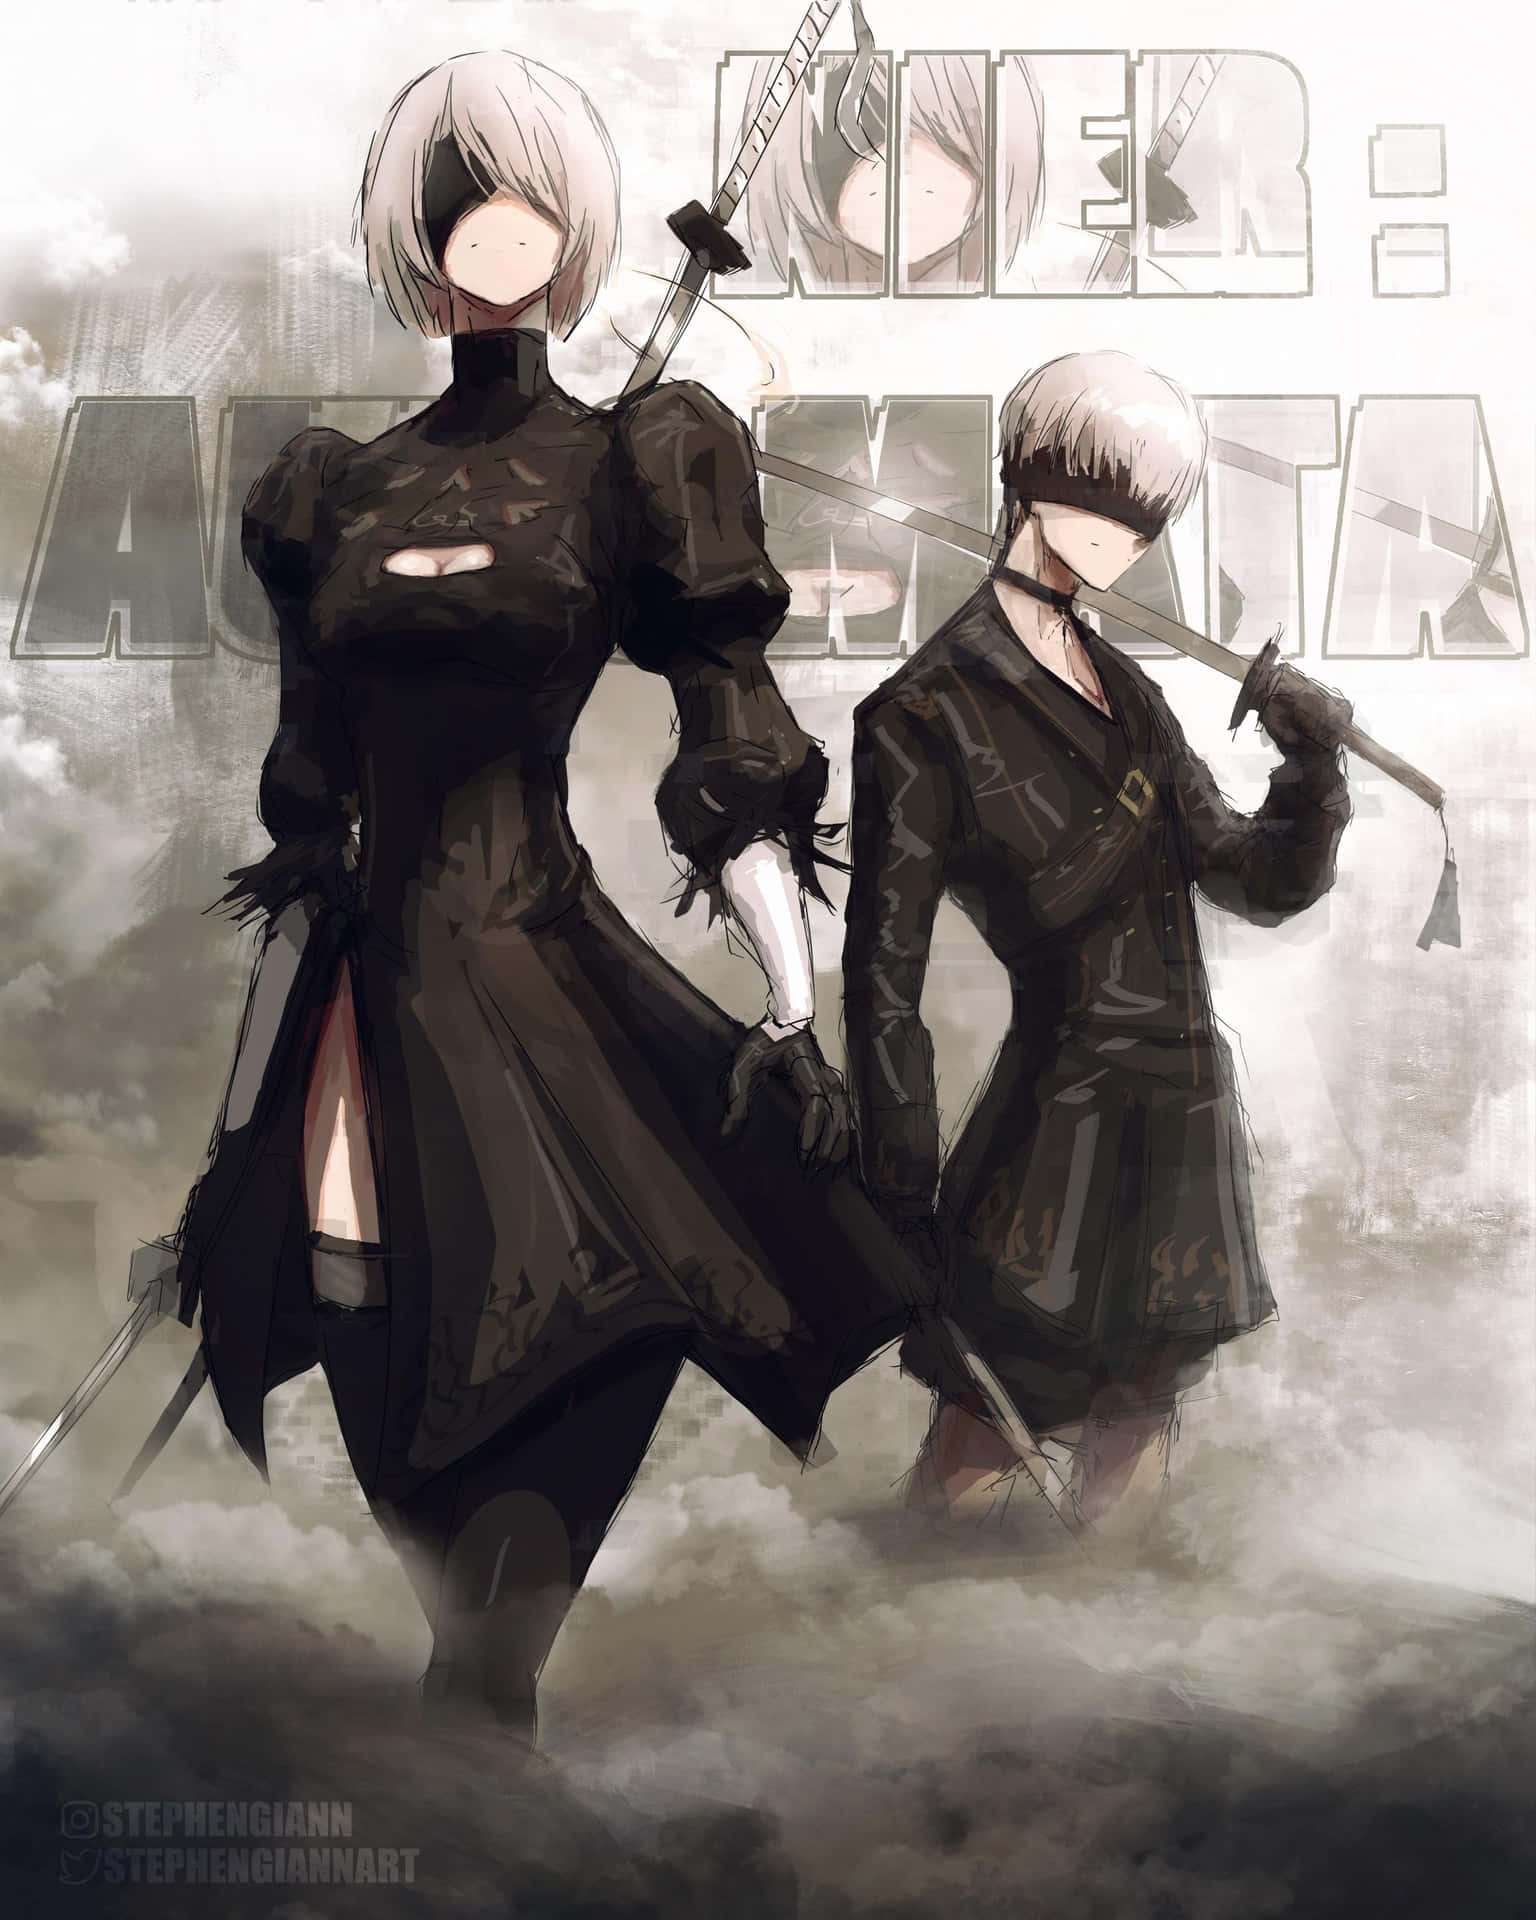 2B, the fearless android soldier protecting humanity.